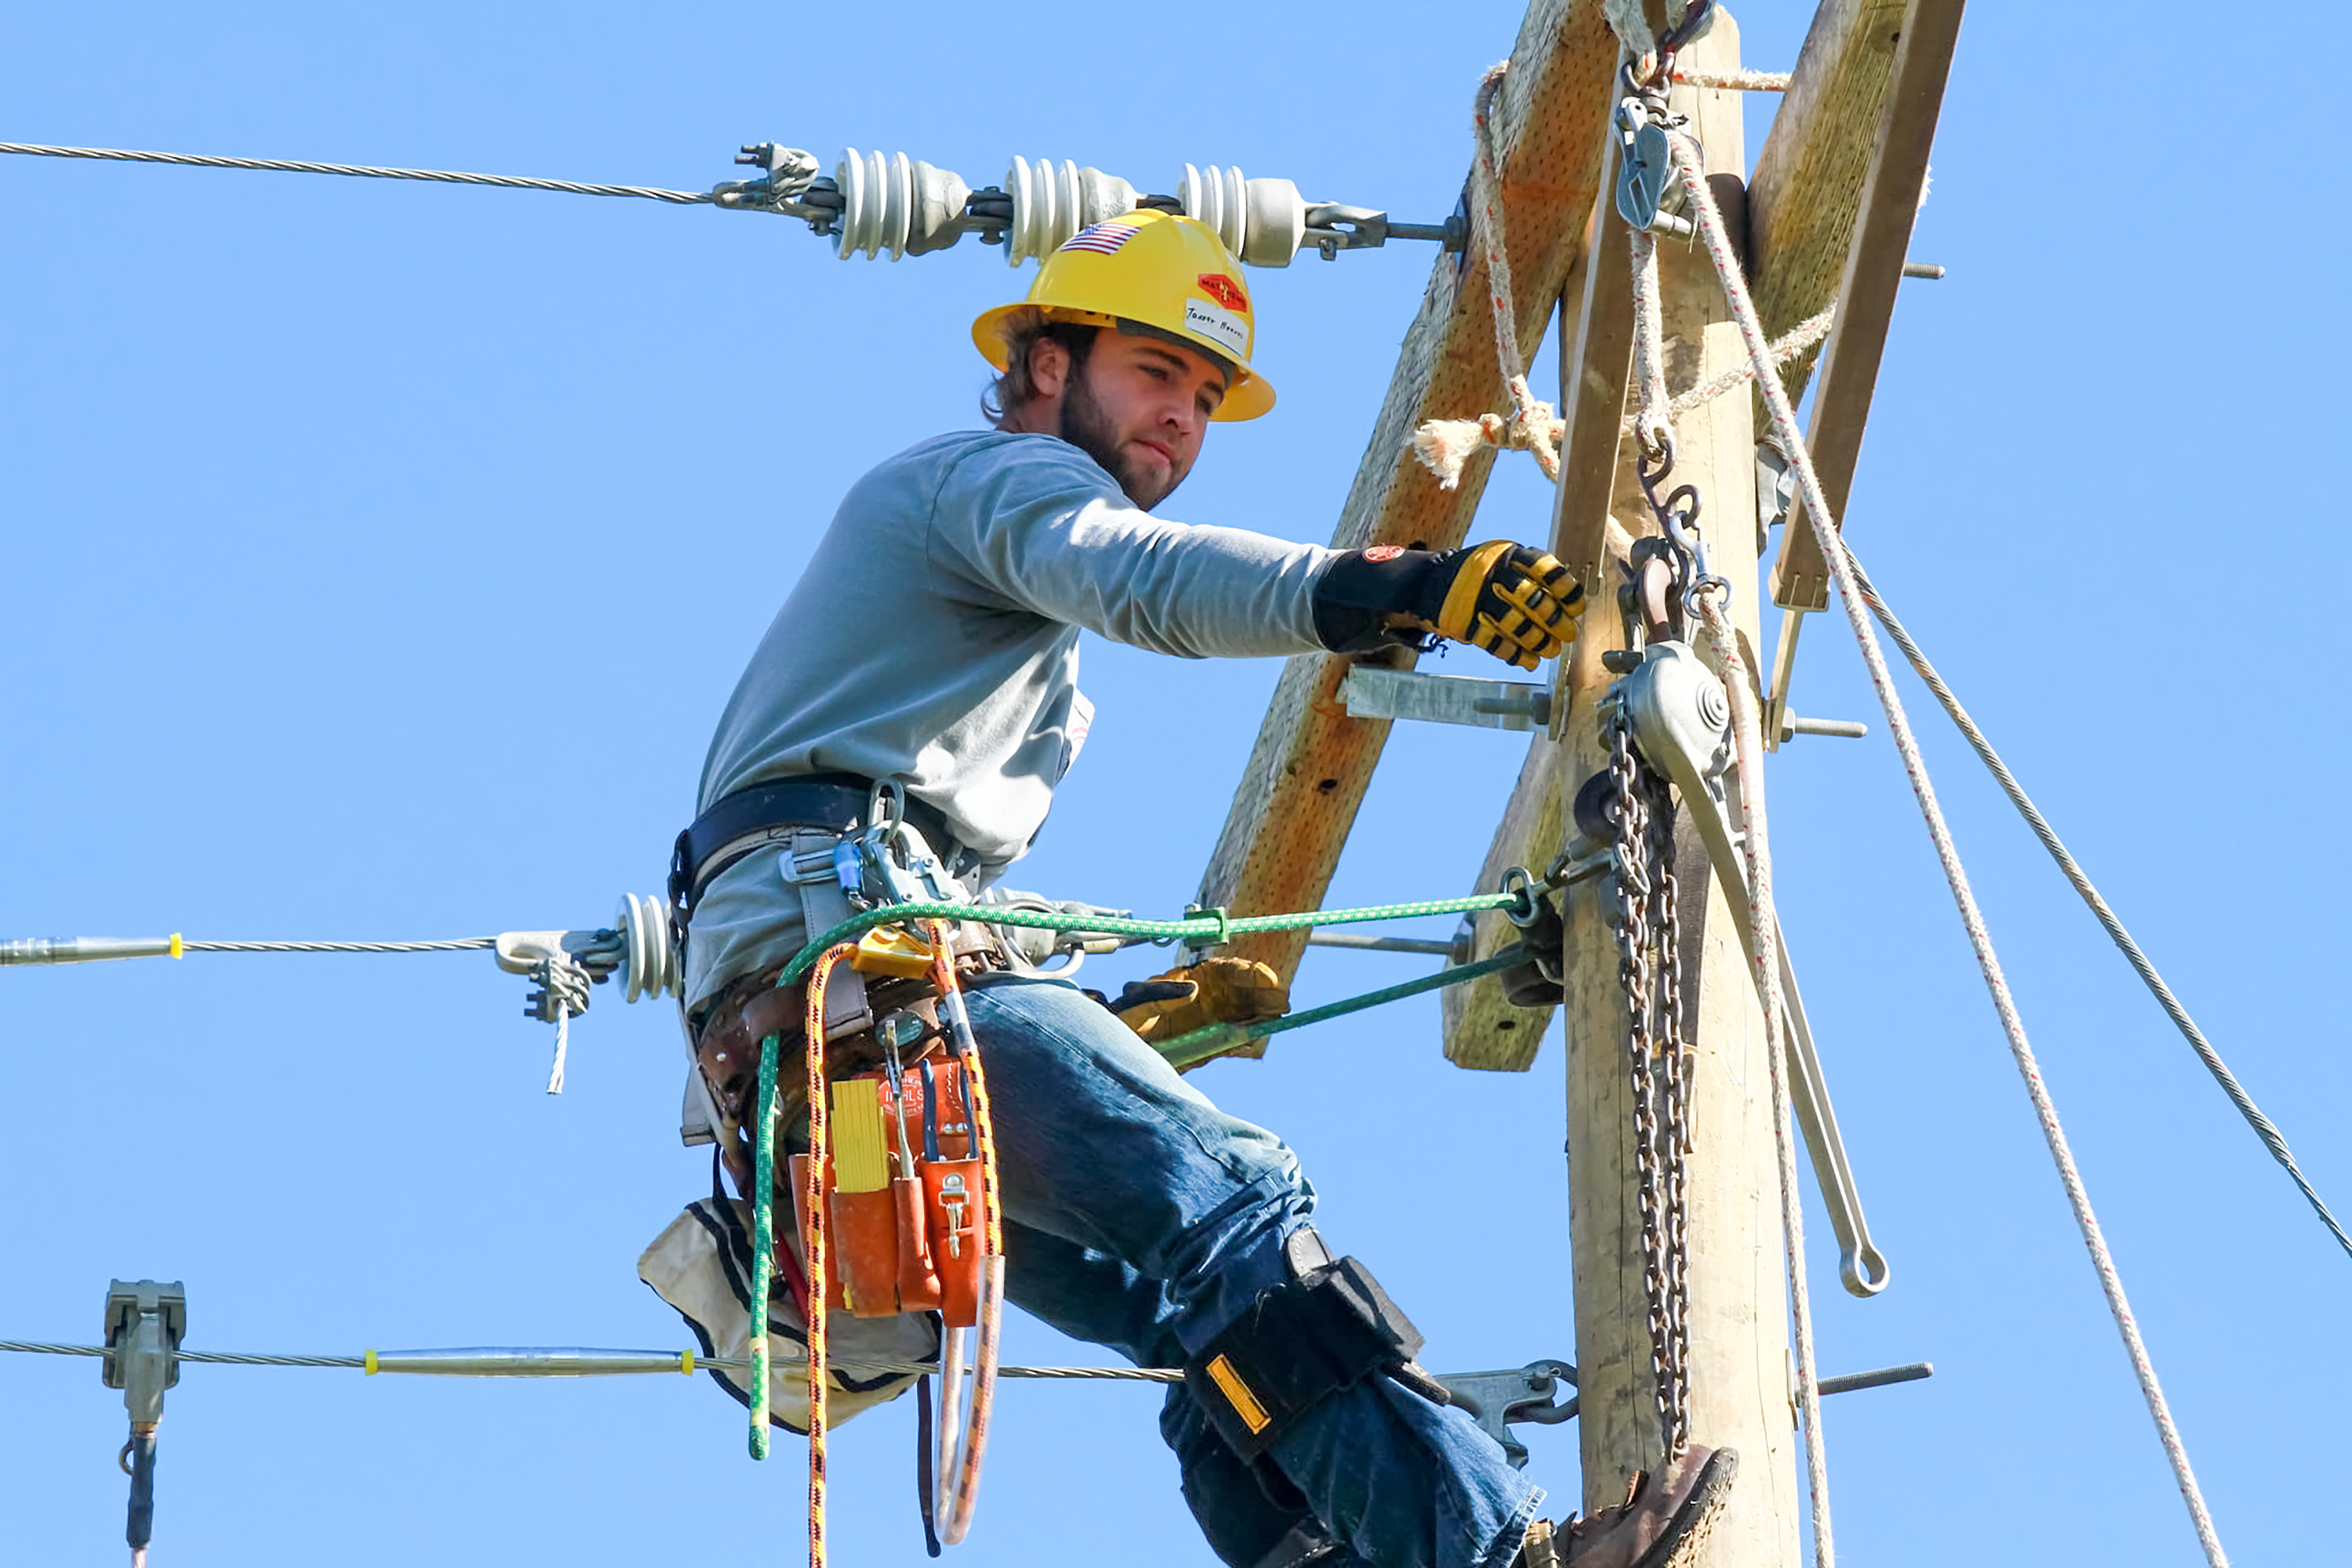 Electrical Lineman Informational Meeting set for March 23